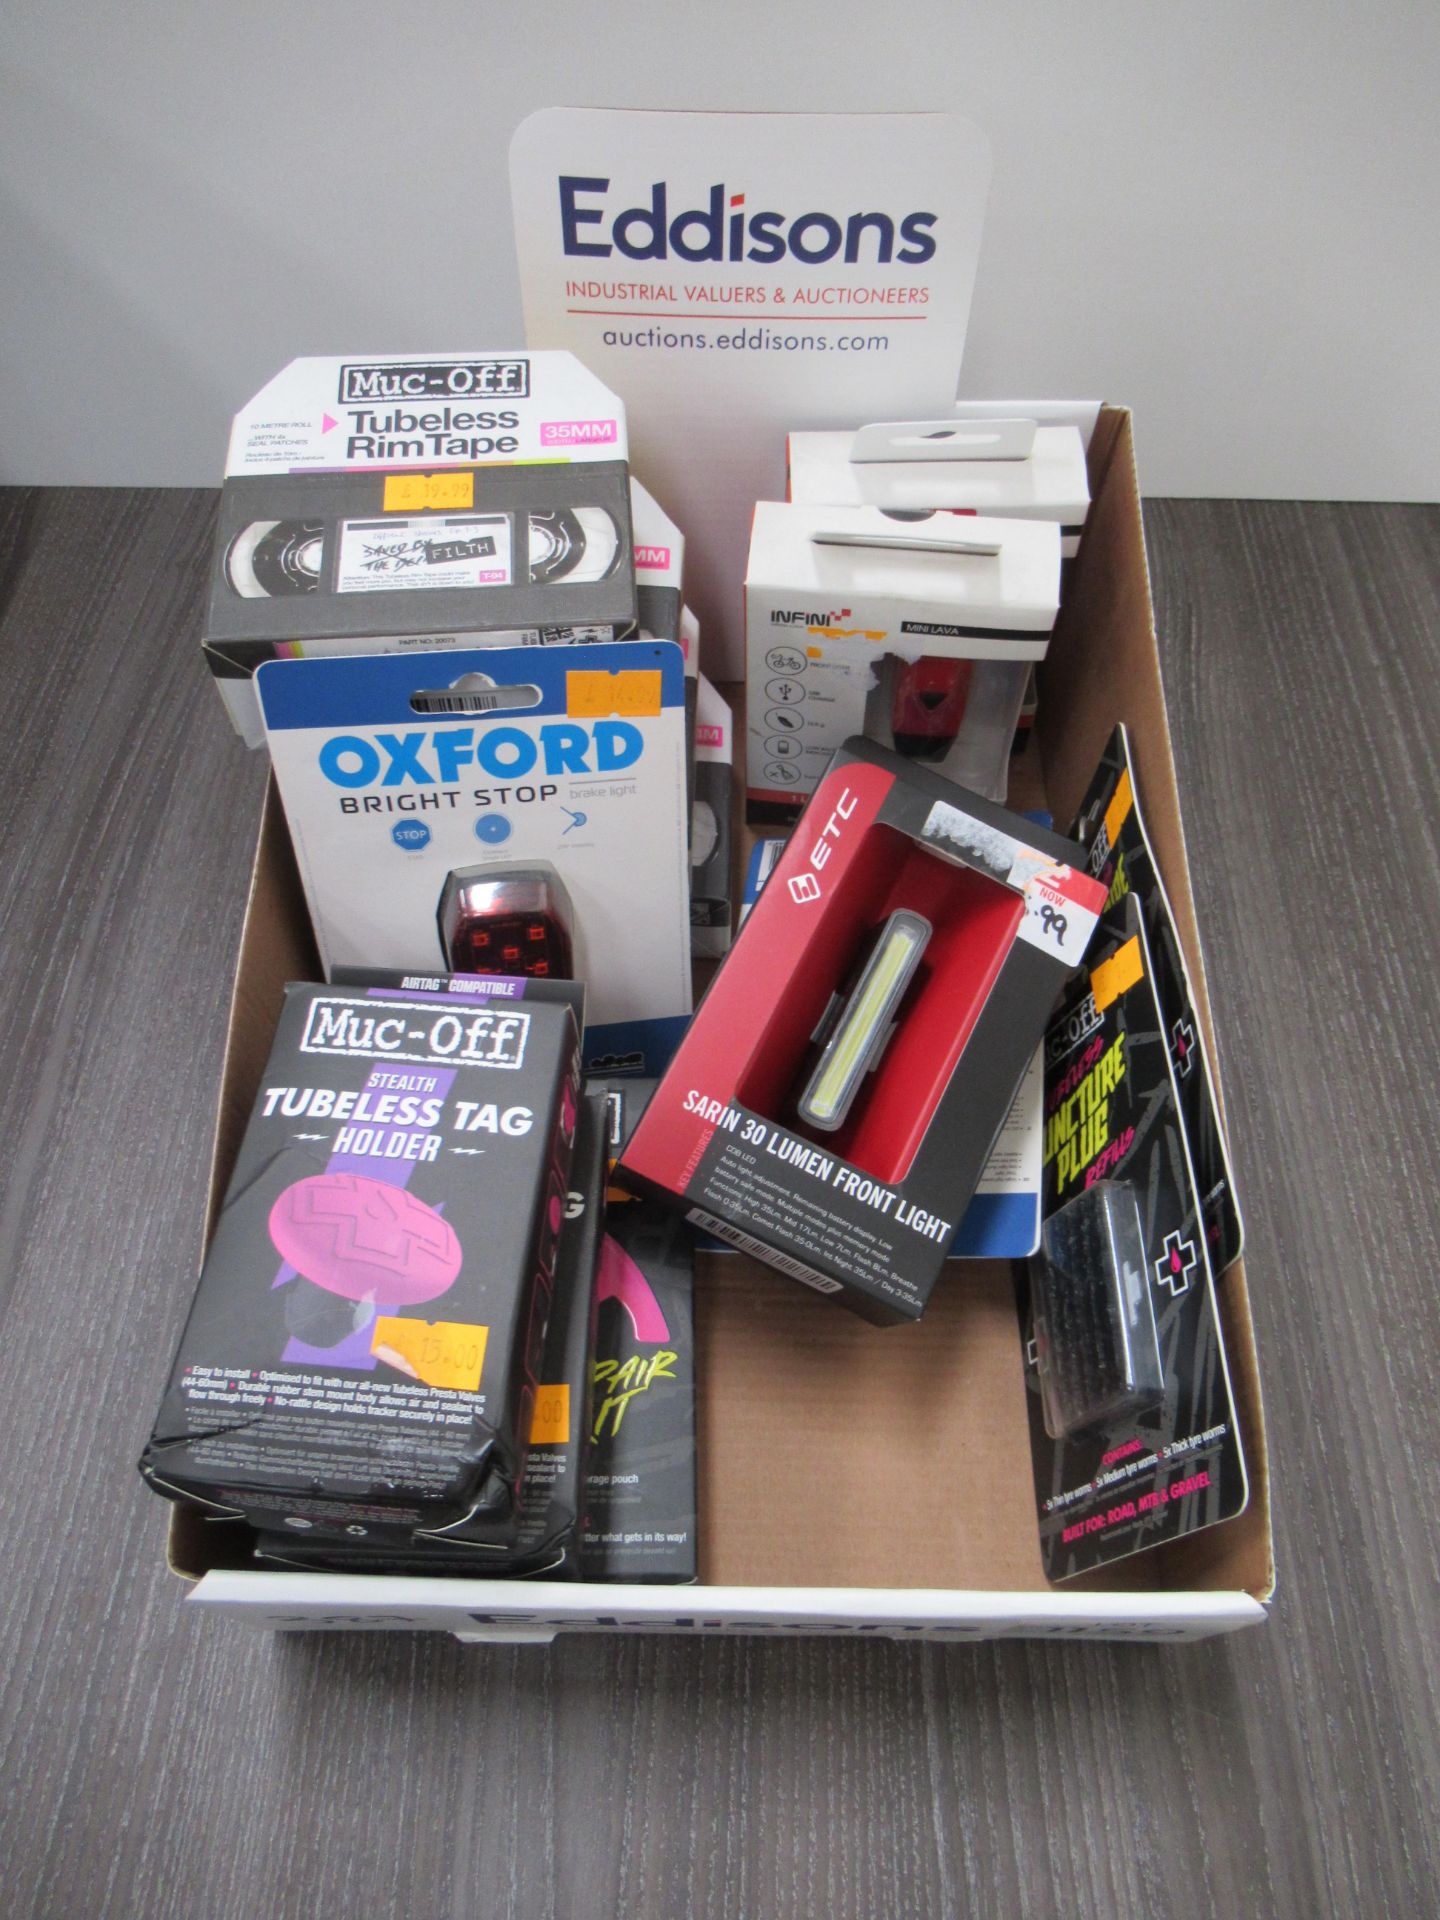 Contents of box to include Muc-Off tubeless rim tape, Muc-Off tubeless tags, Oxford brake lights, E